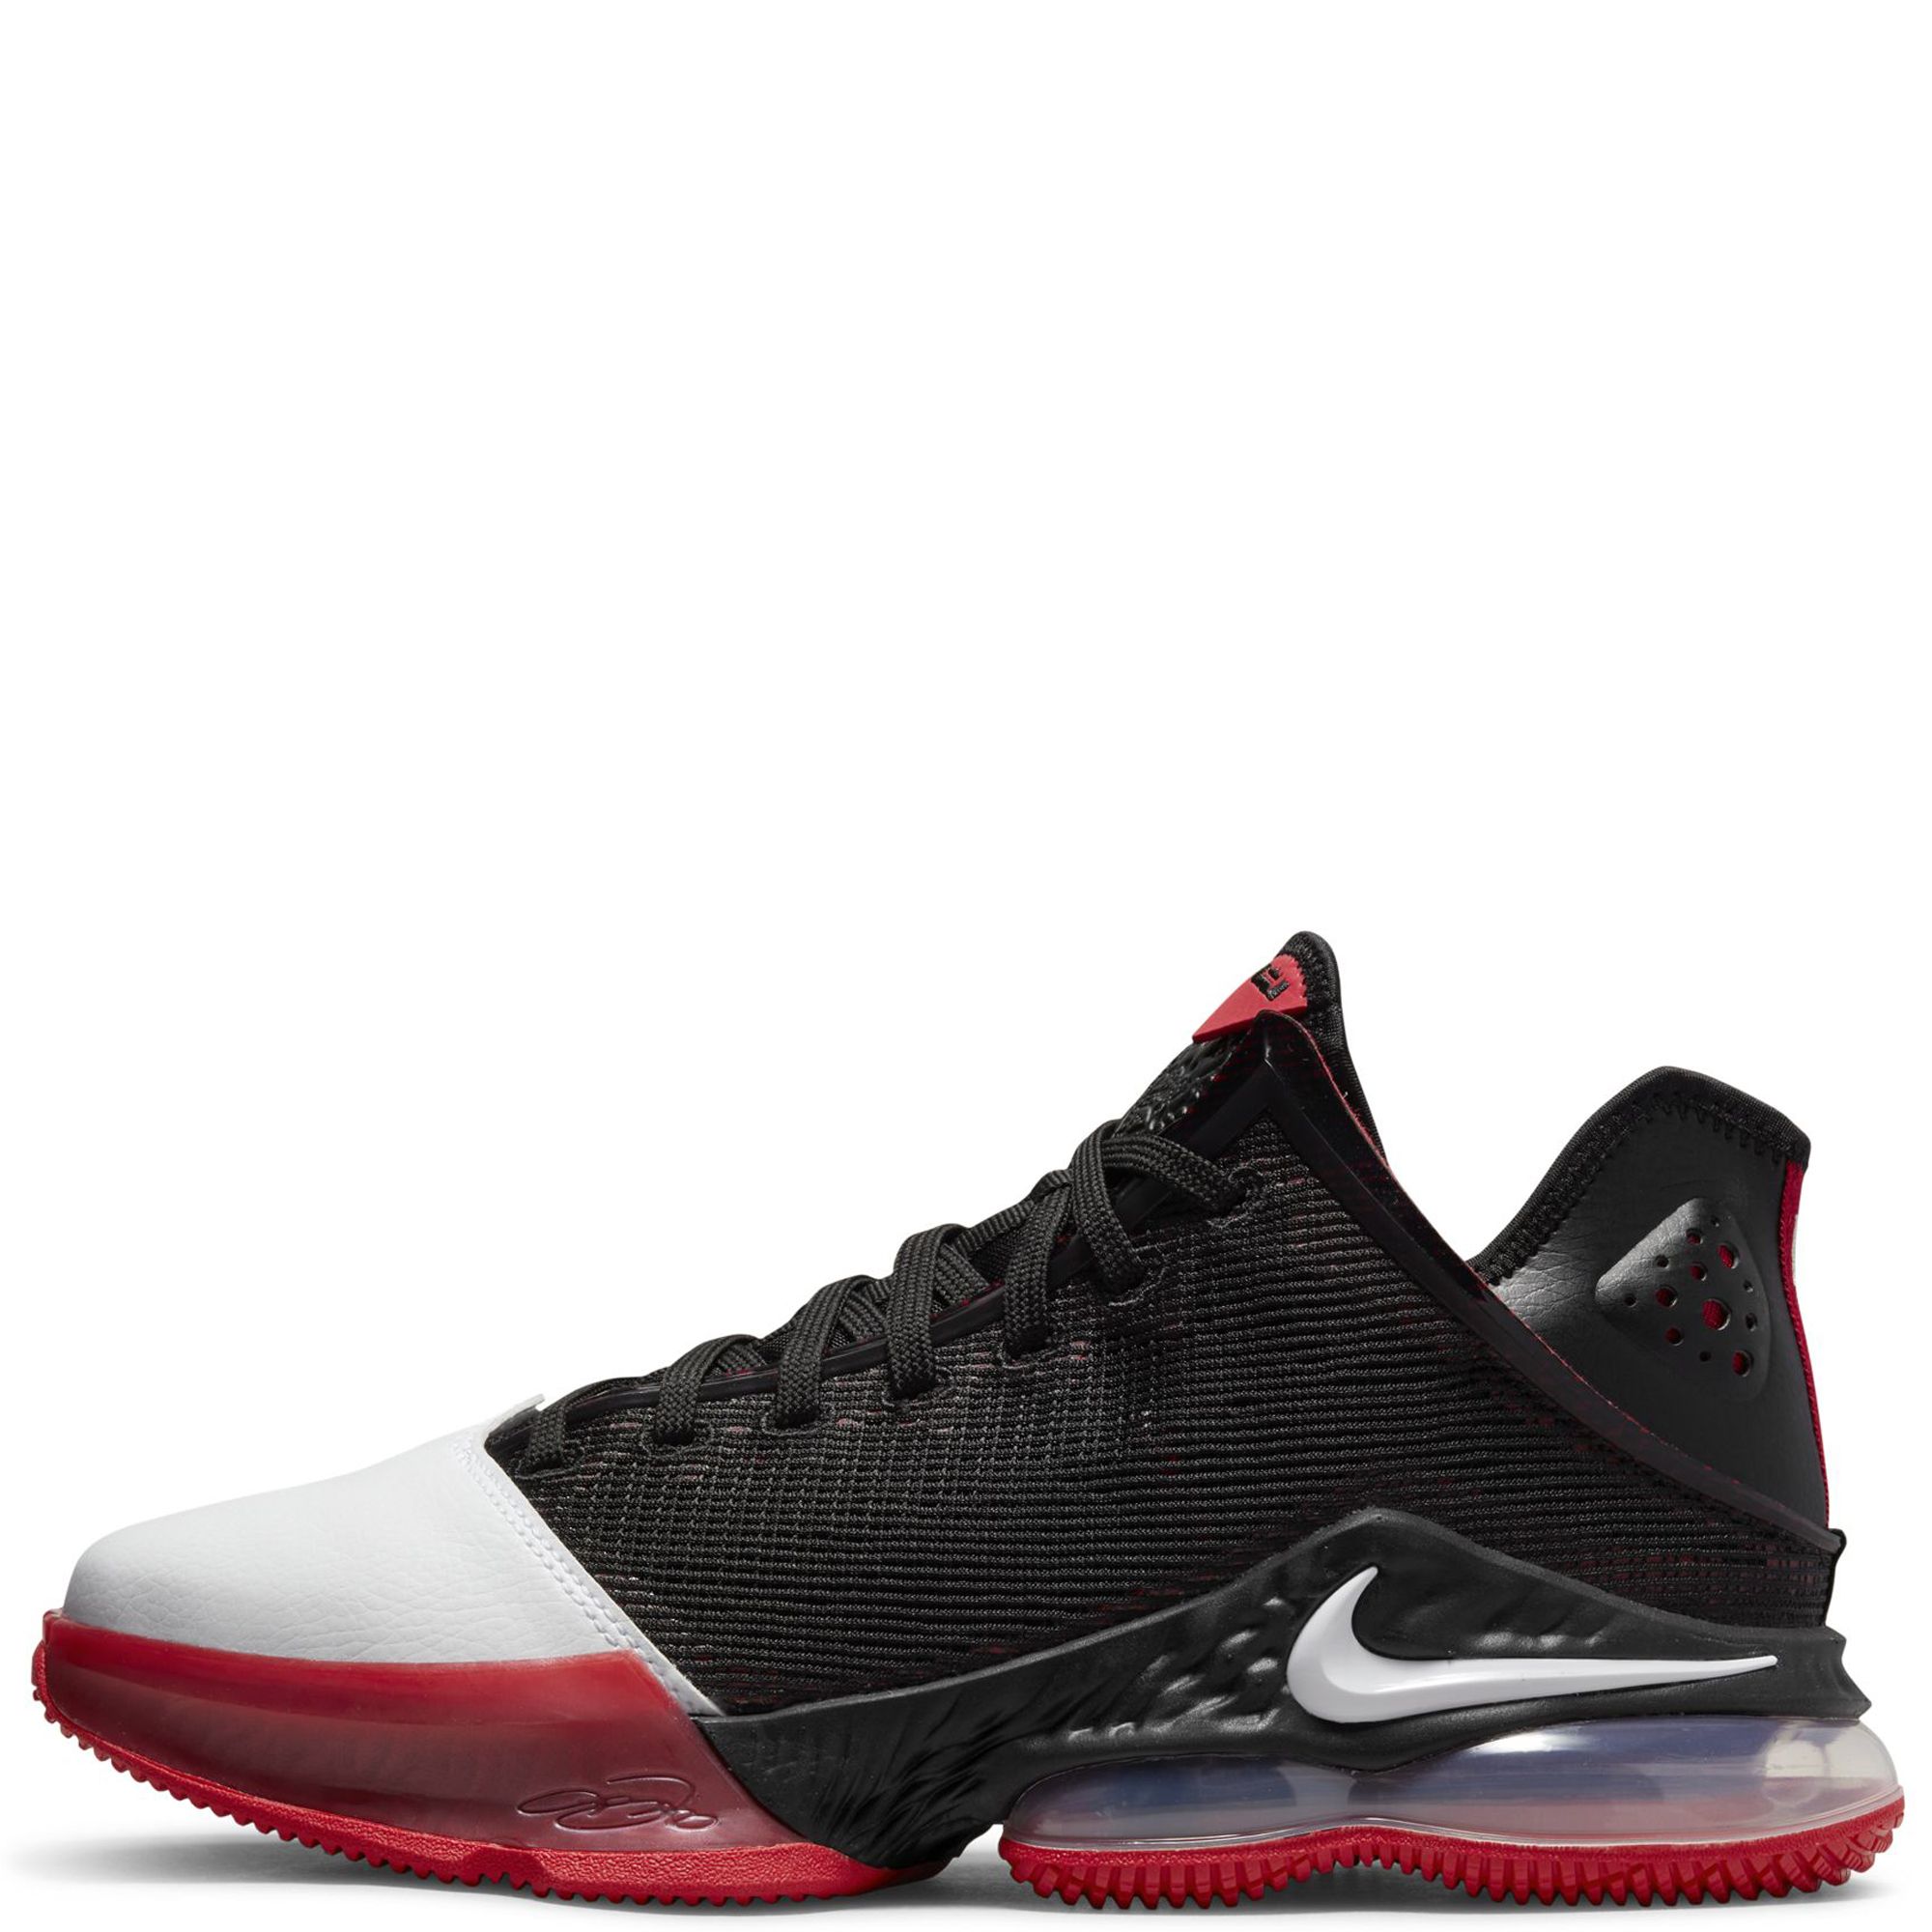 Nike Lebron 19 Low Bred Men's Shoes Black-Red-White dh1270-001